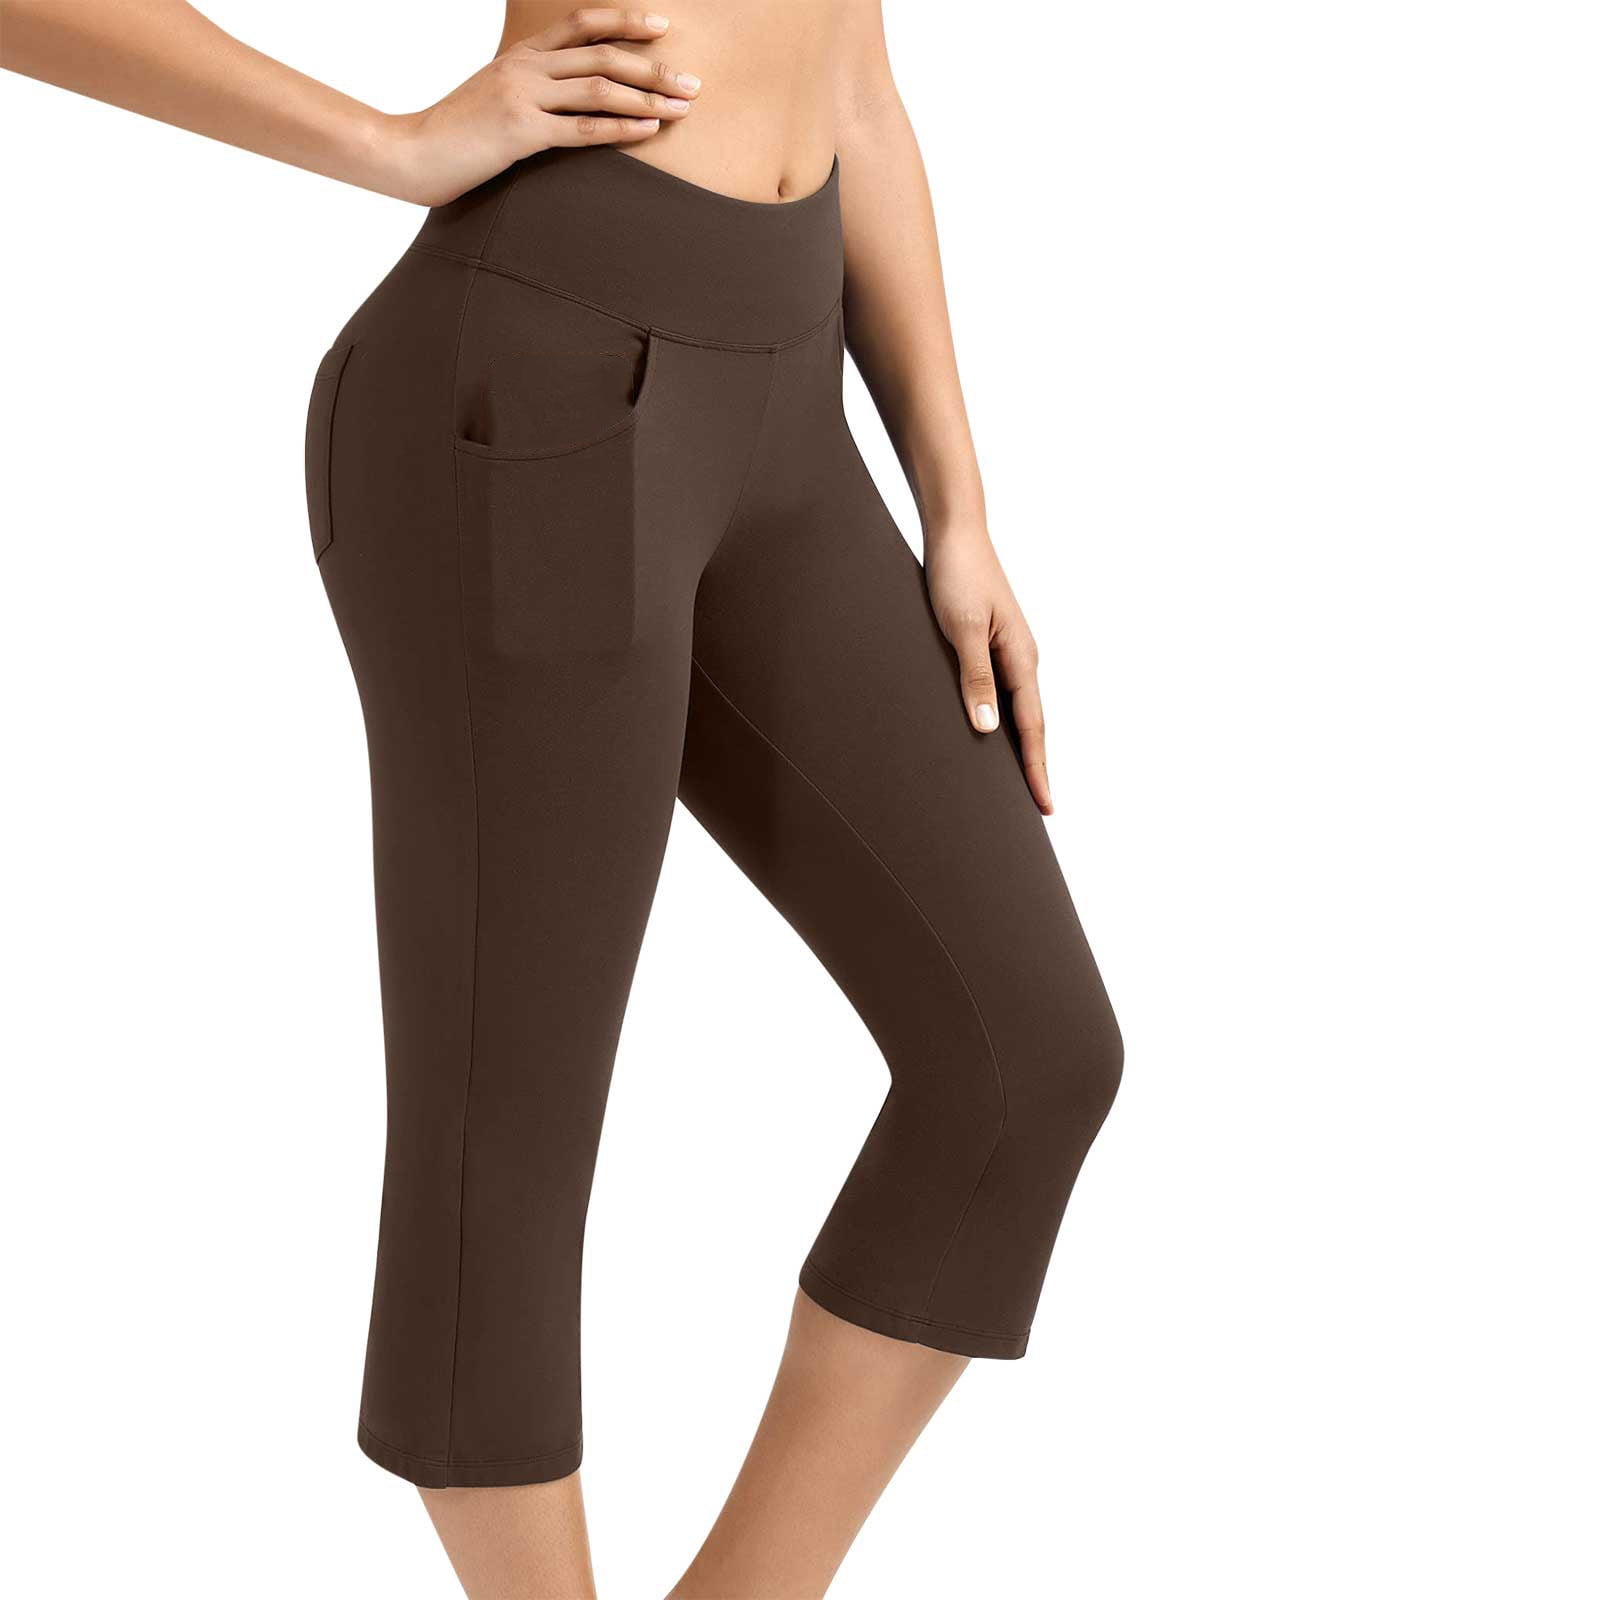 Womens Casual Yoga Capri Pants Solid Elastic Waist Knee Length Leggings  with Pockets Workout Cropped Leg Pant Gym Sports(XXL,Coffee)